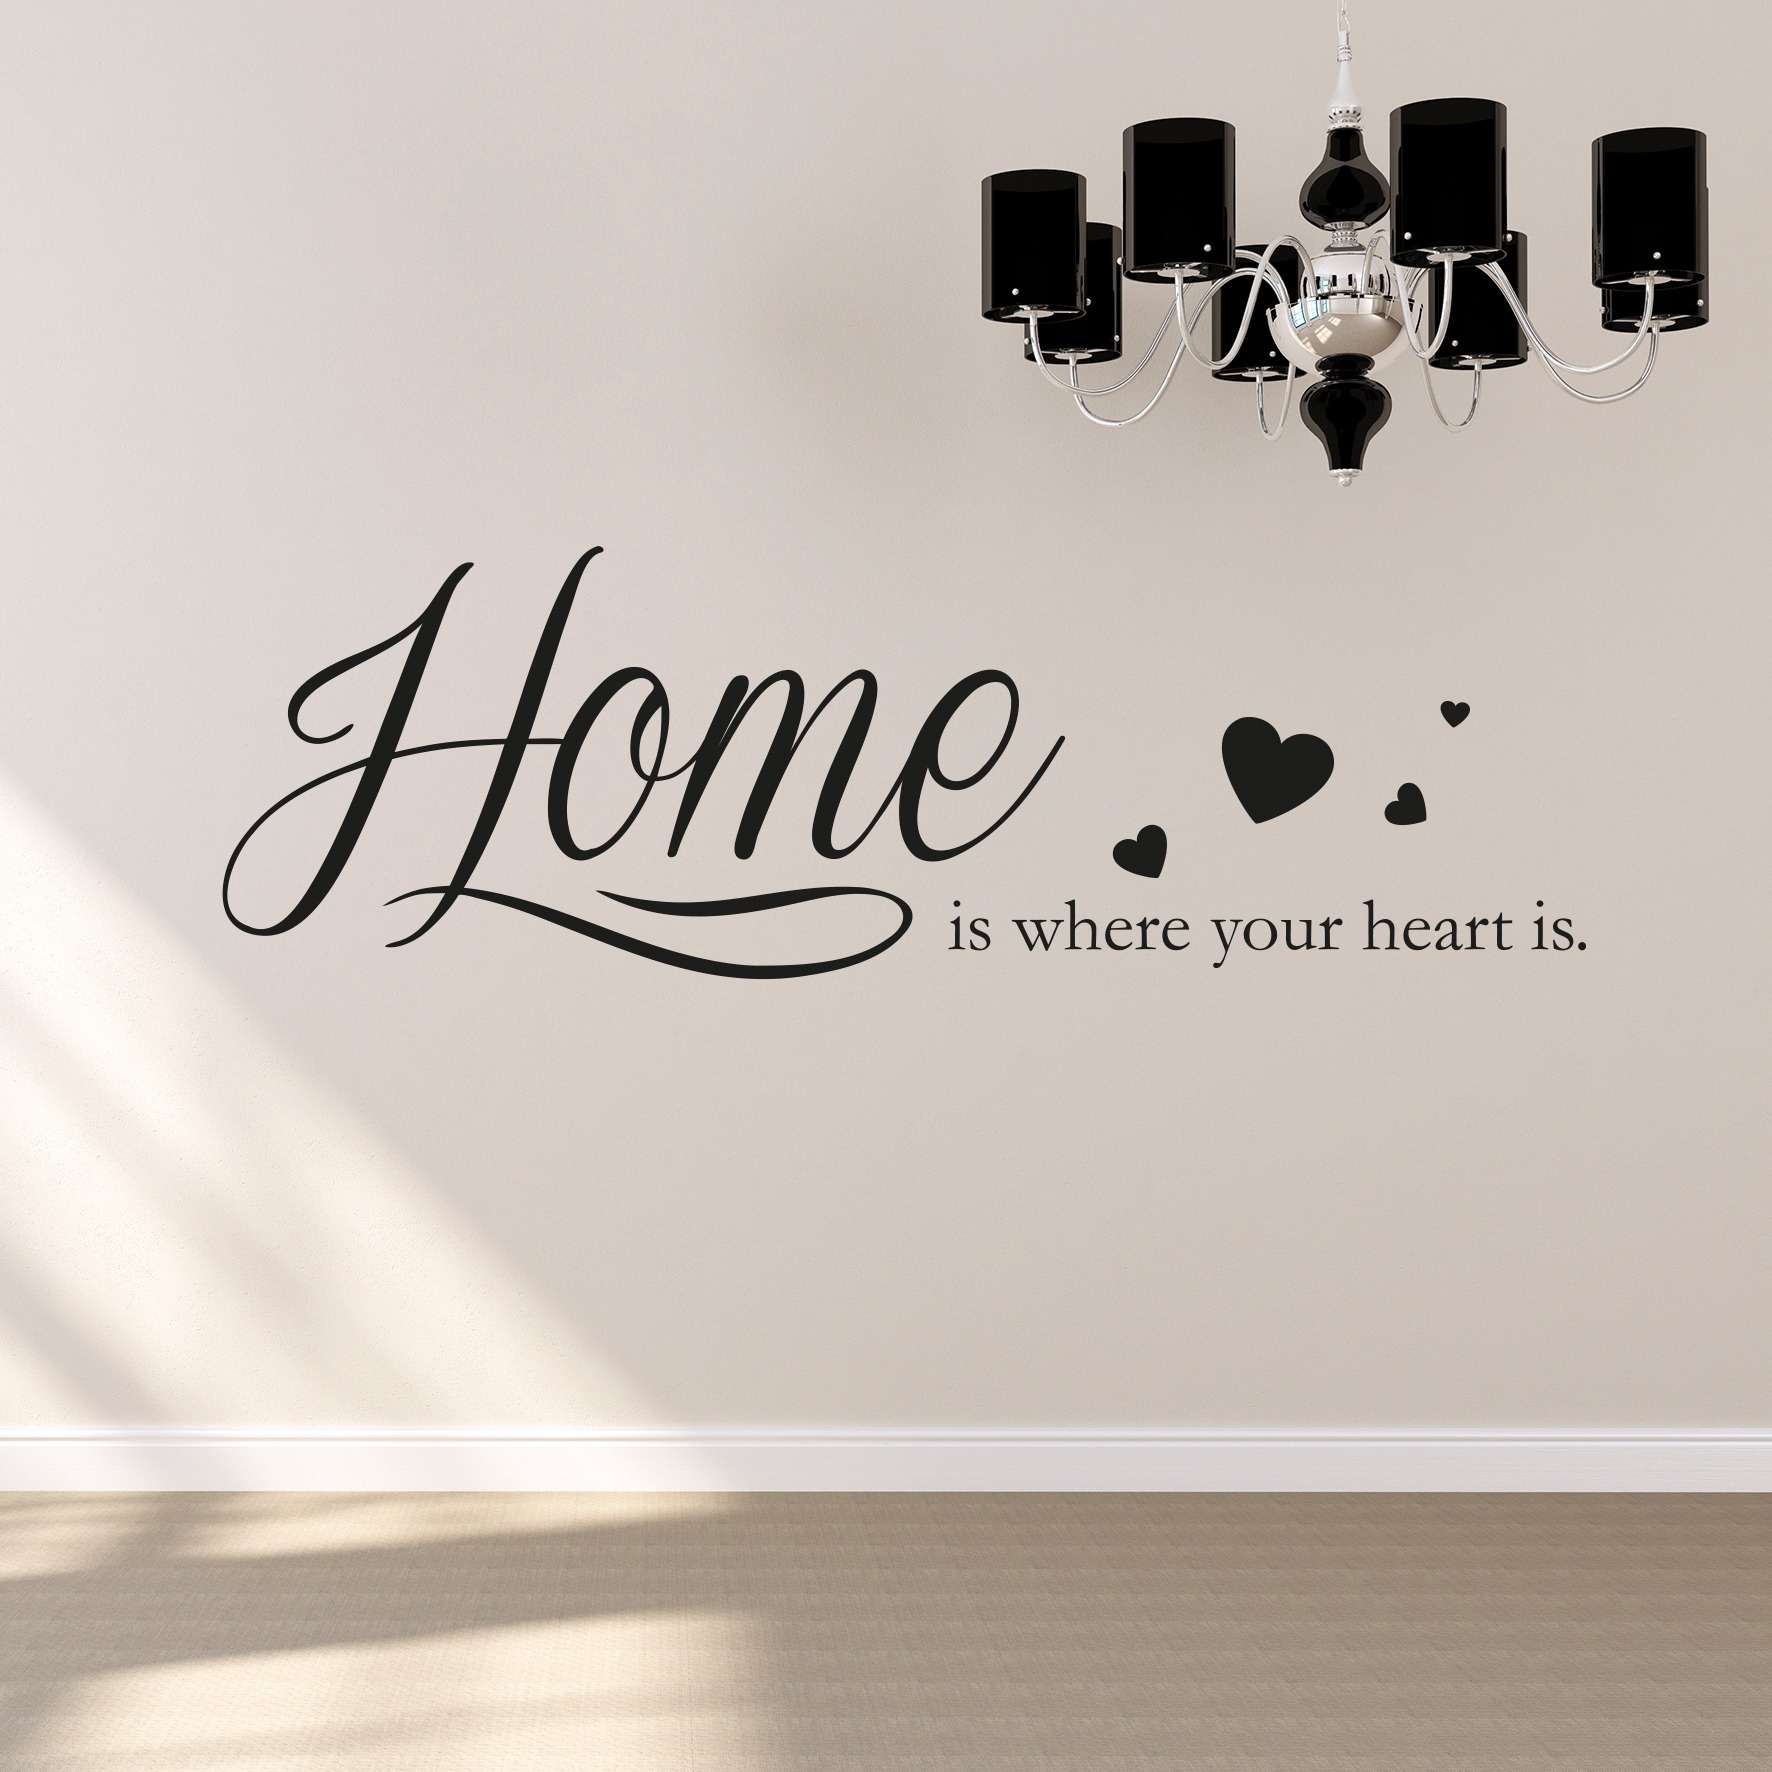 Wandtattoo »Home is where your heart is«, 120 x 30 cm